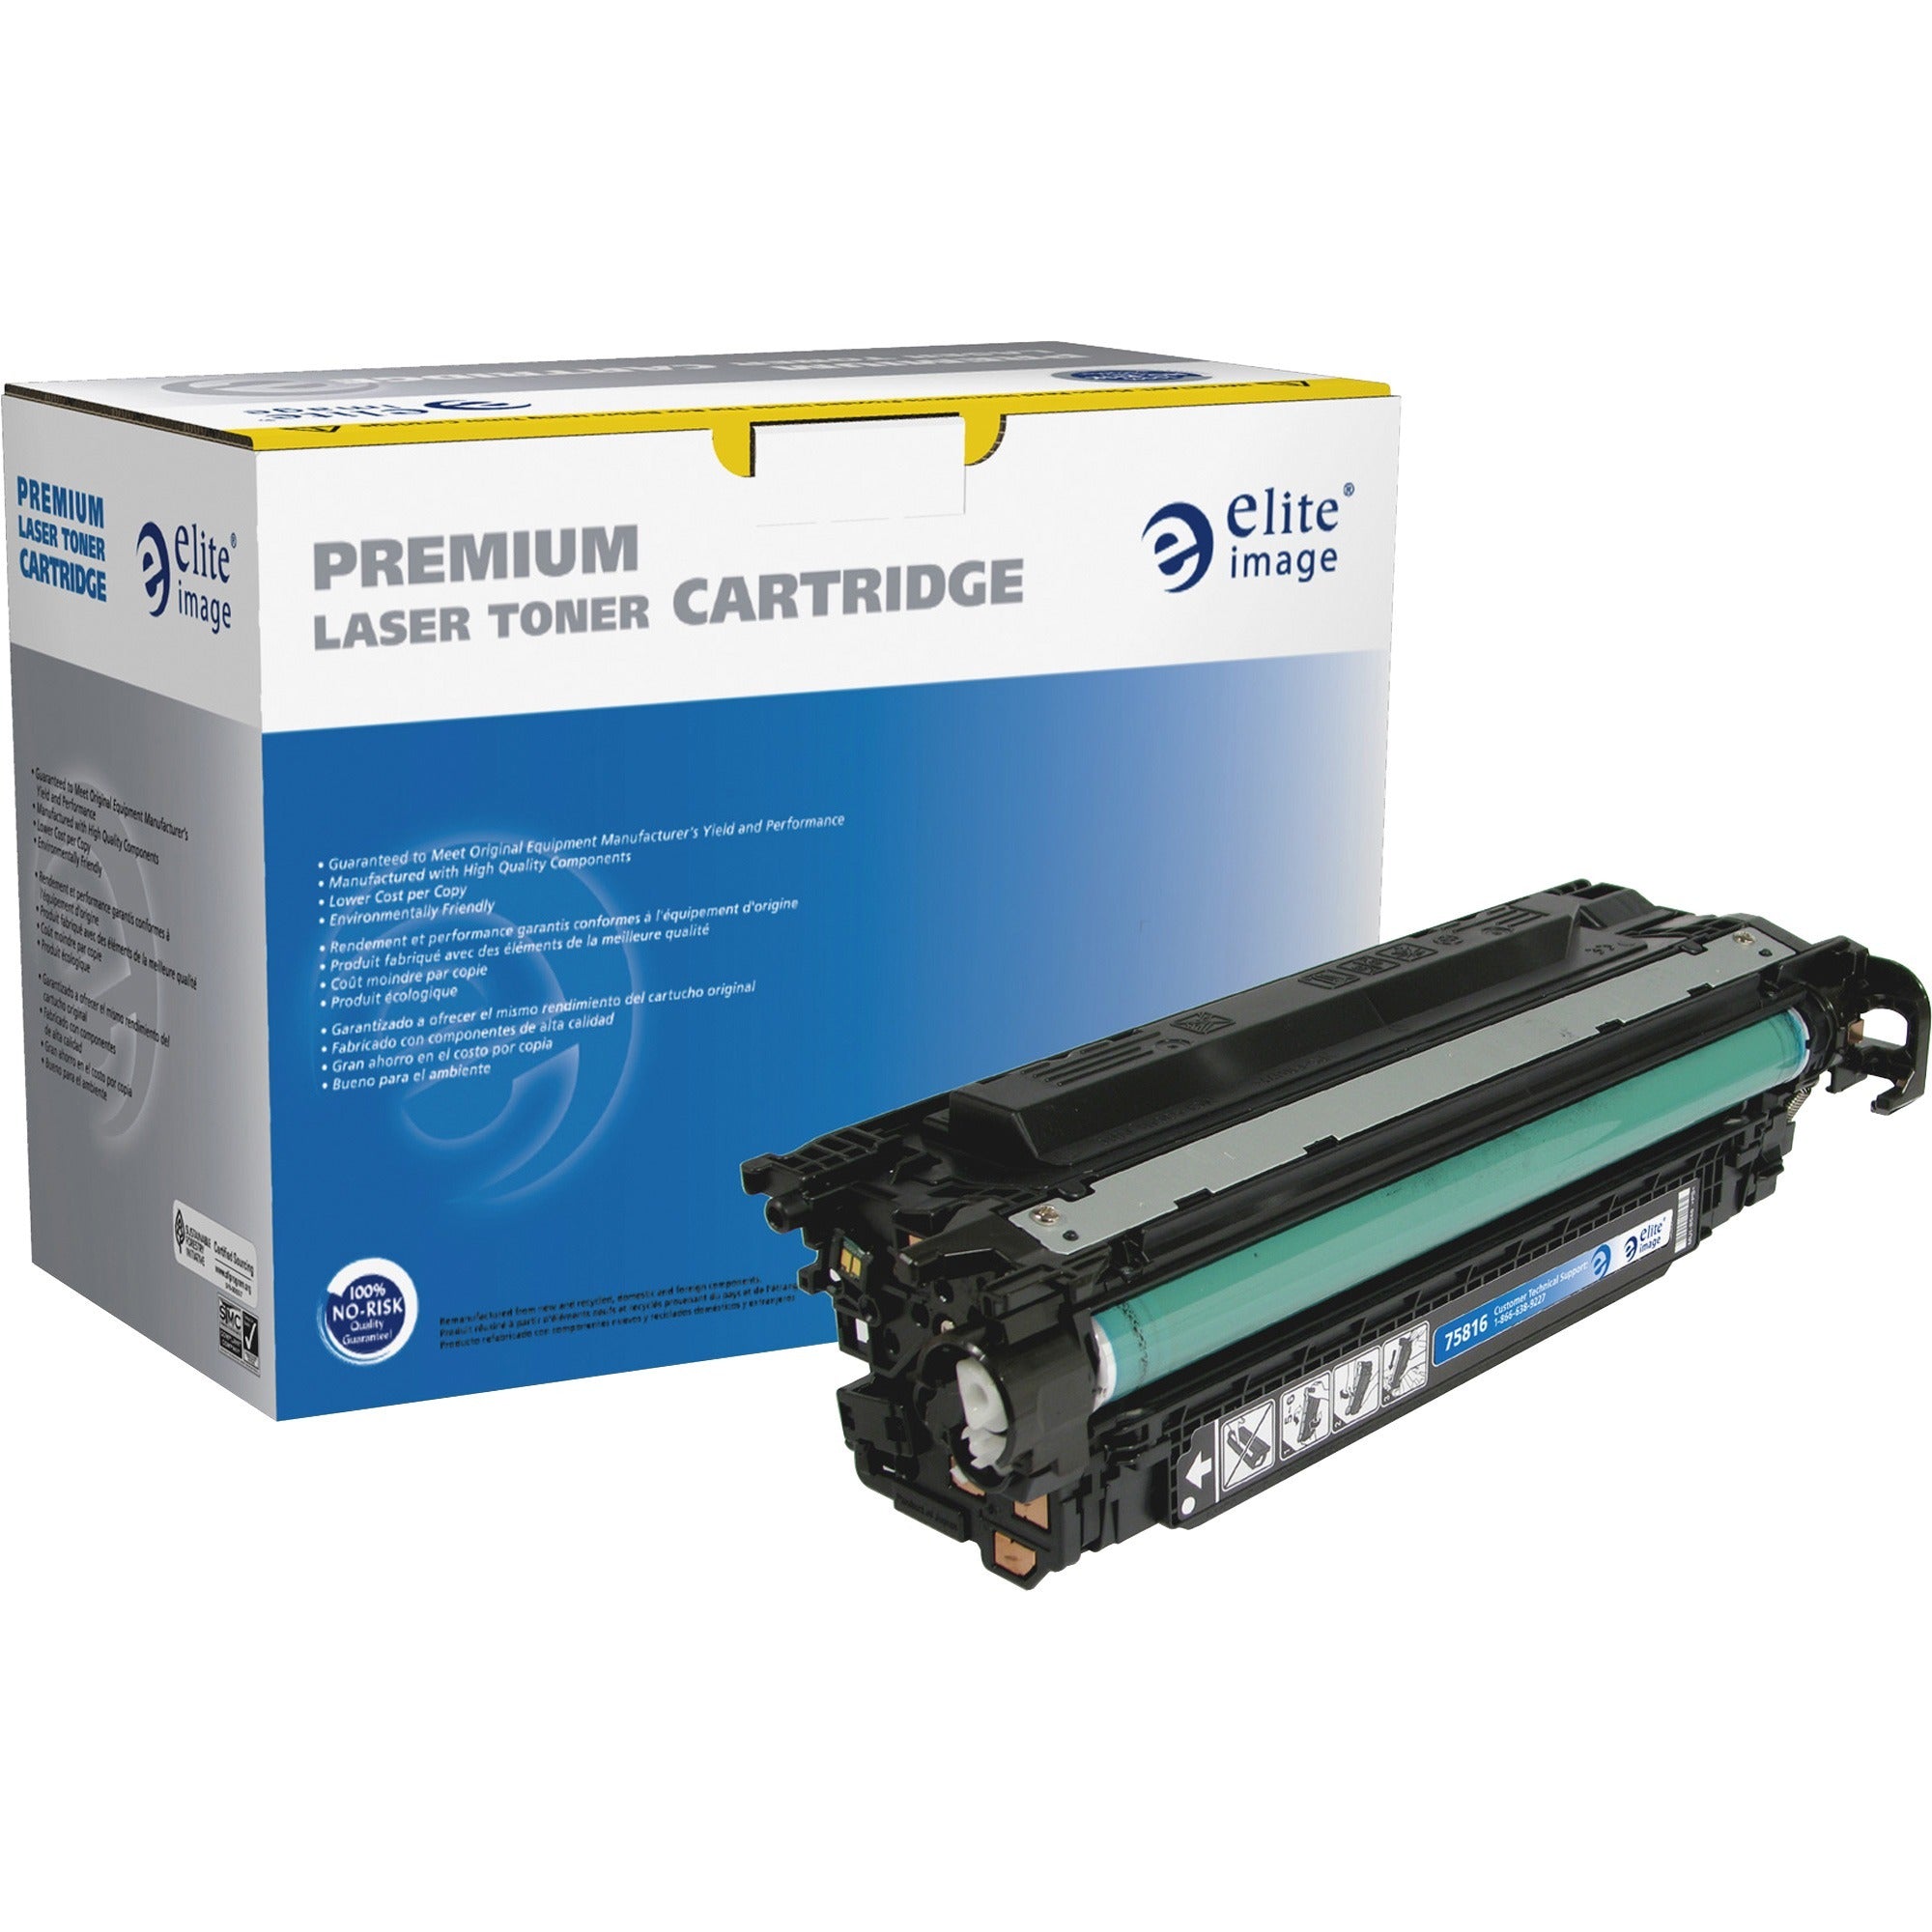 Elite Image Remanufactured High Yield Laser Toner Cartridge - Alternative for HP 507X (CE400X) - Black - 1 Each - 11000 Pages